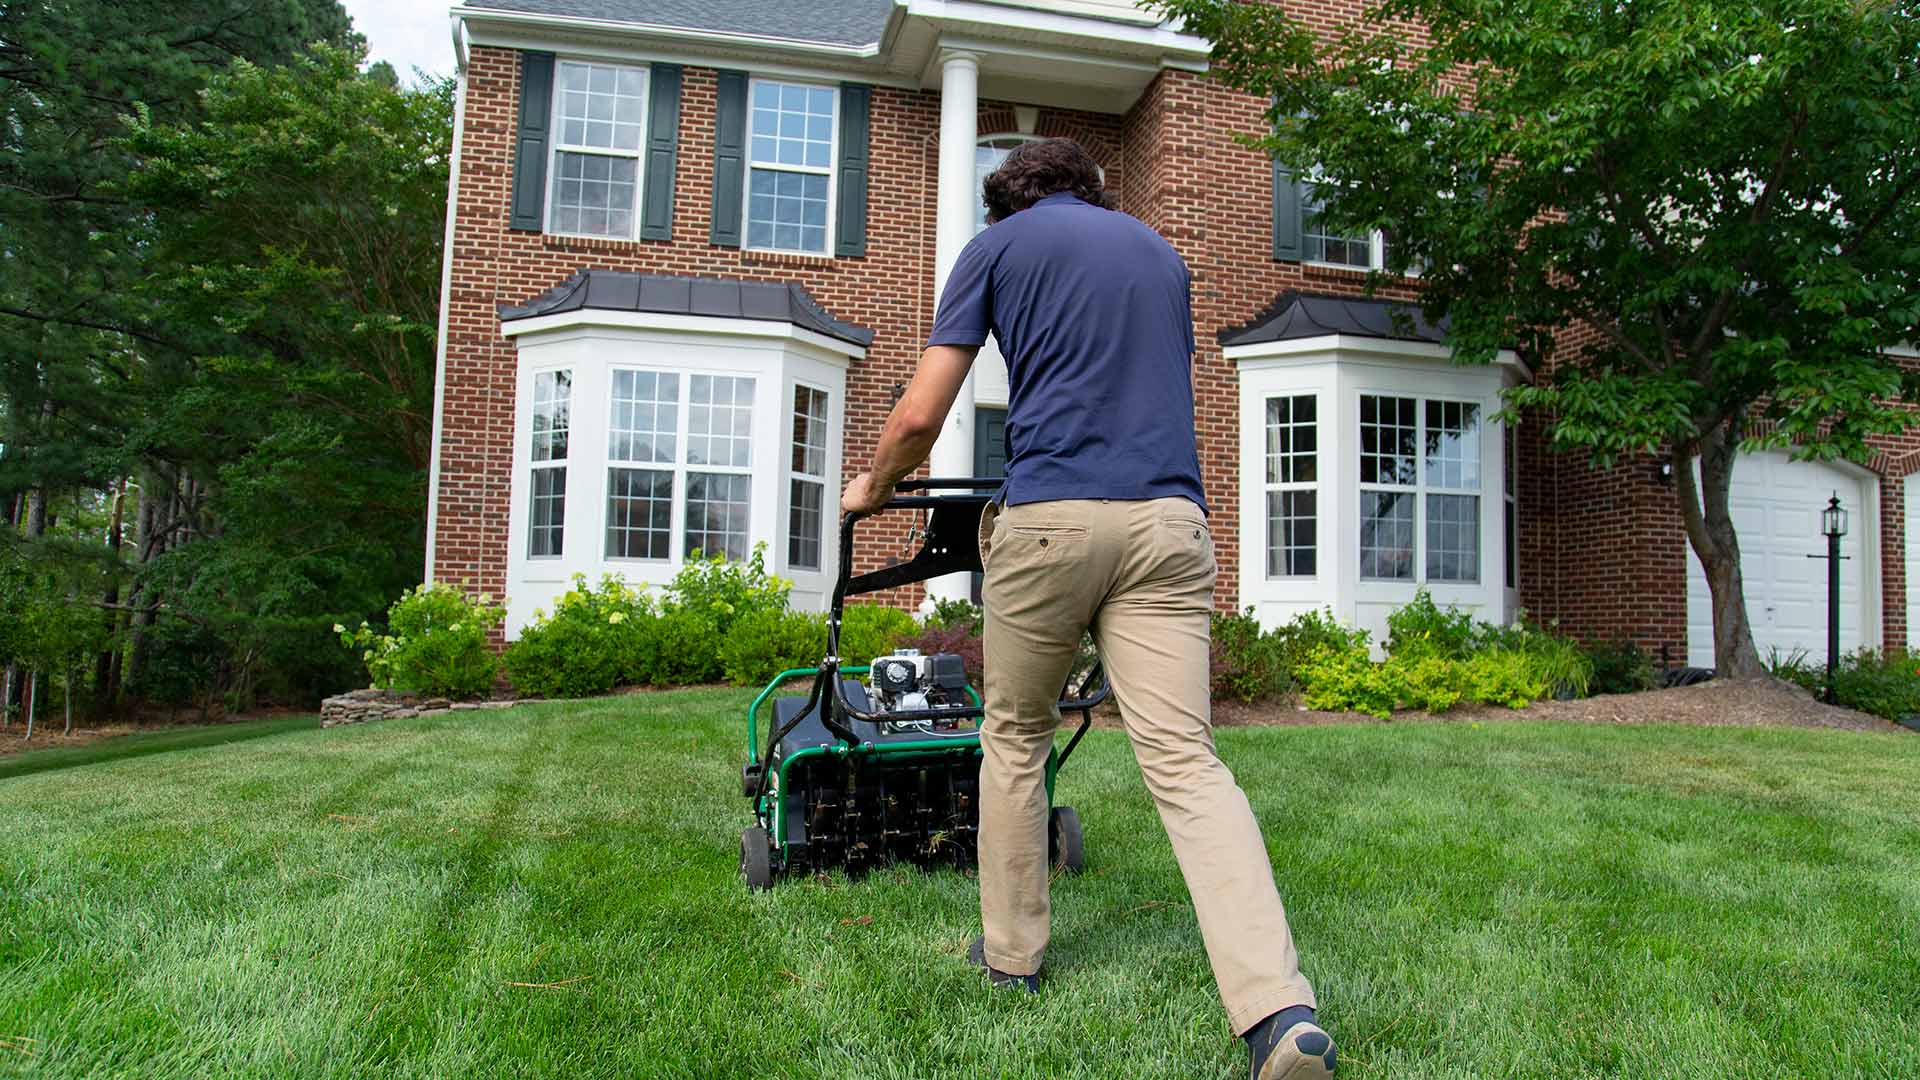 A man aerating a beautiful lawn with a brick house in the background.